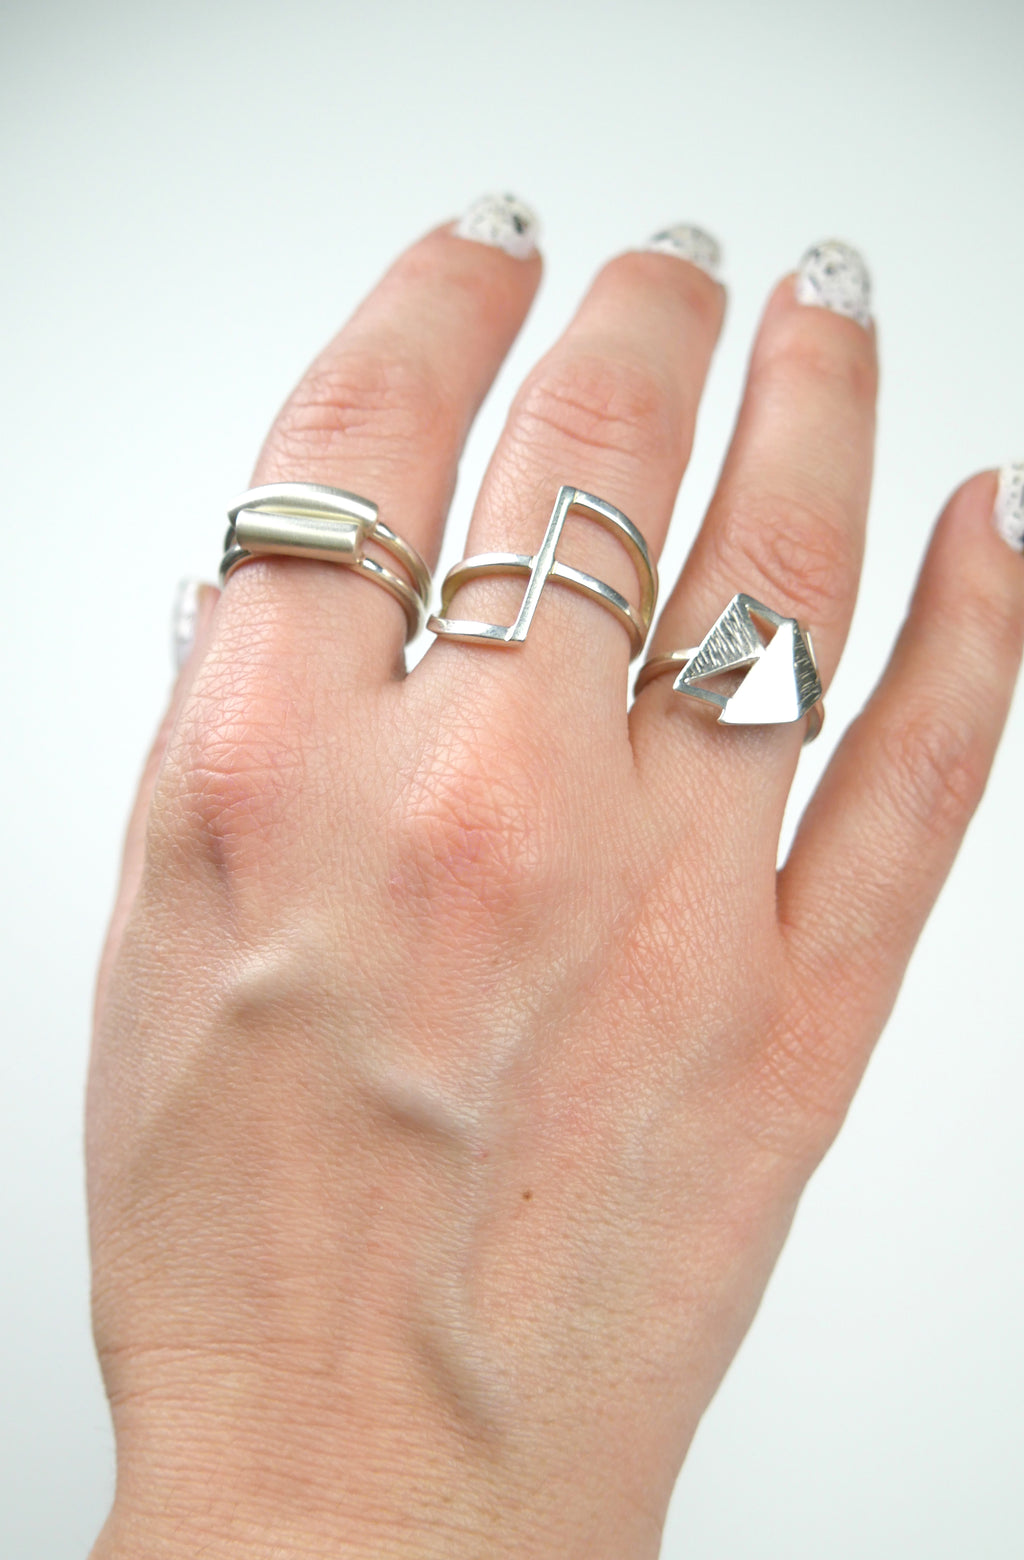 Straight line, minimalist sterling silver ring